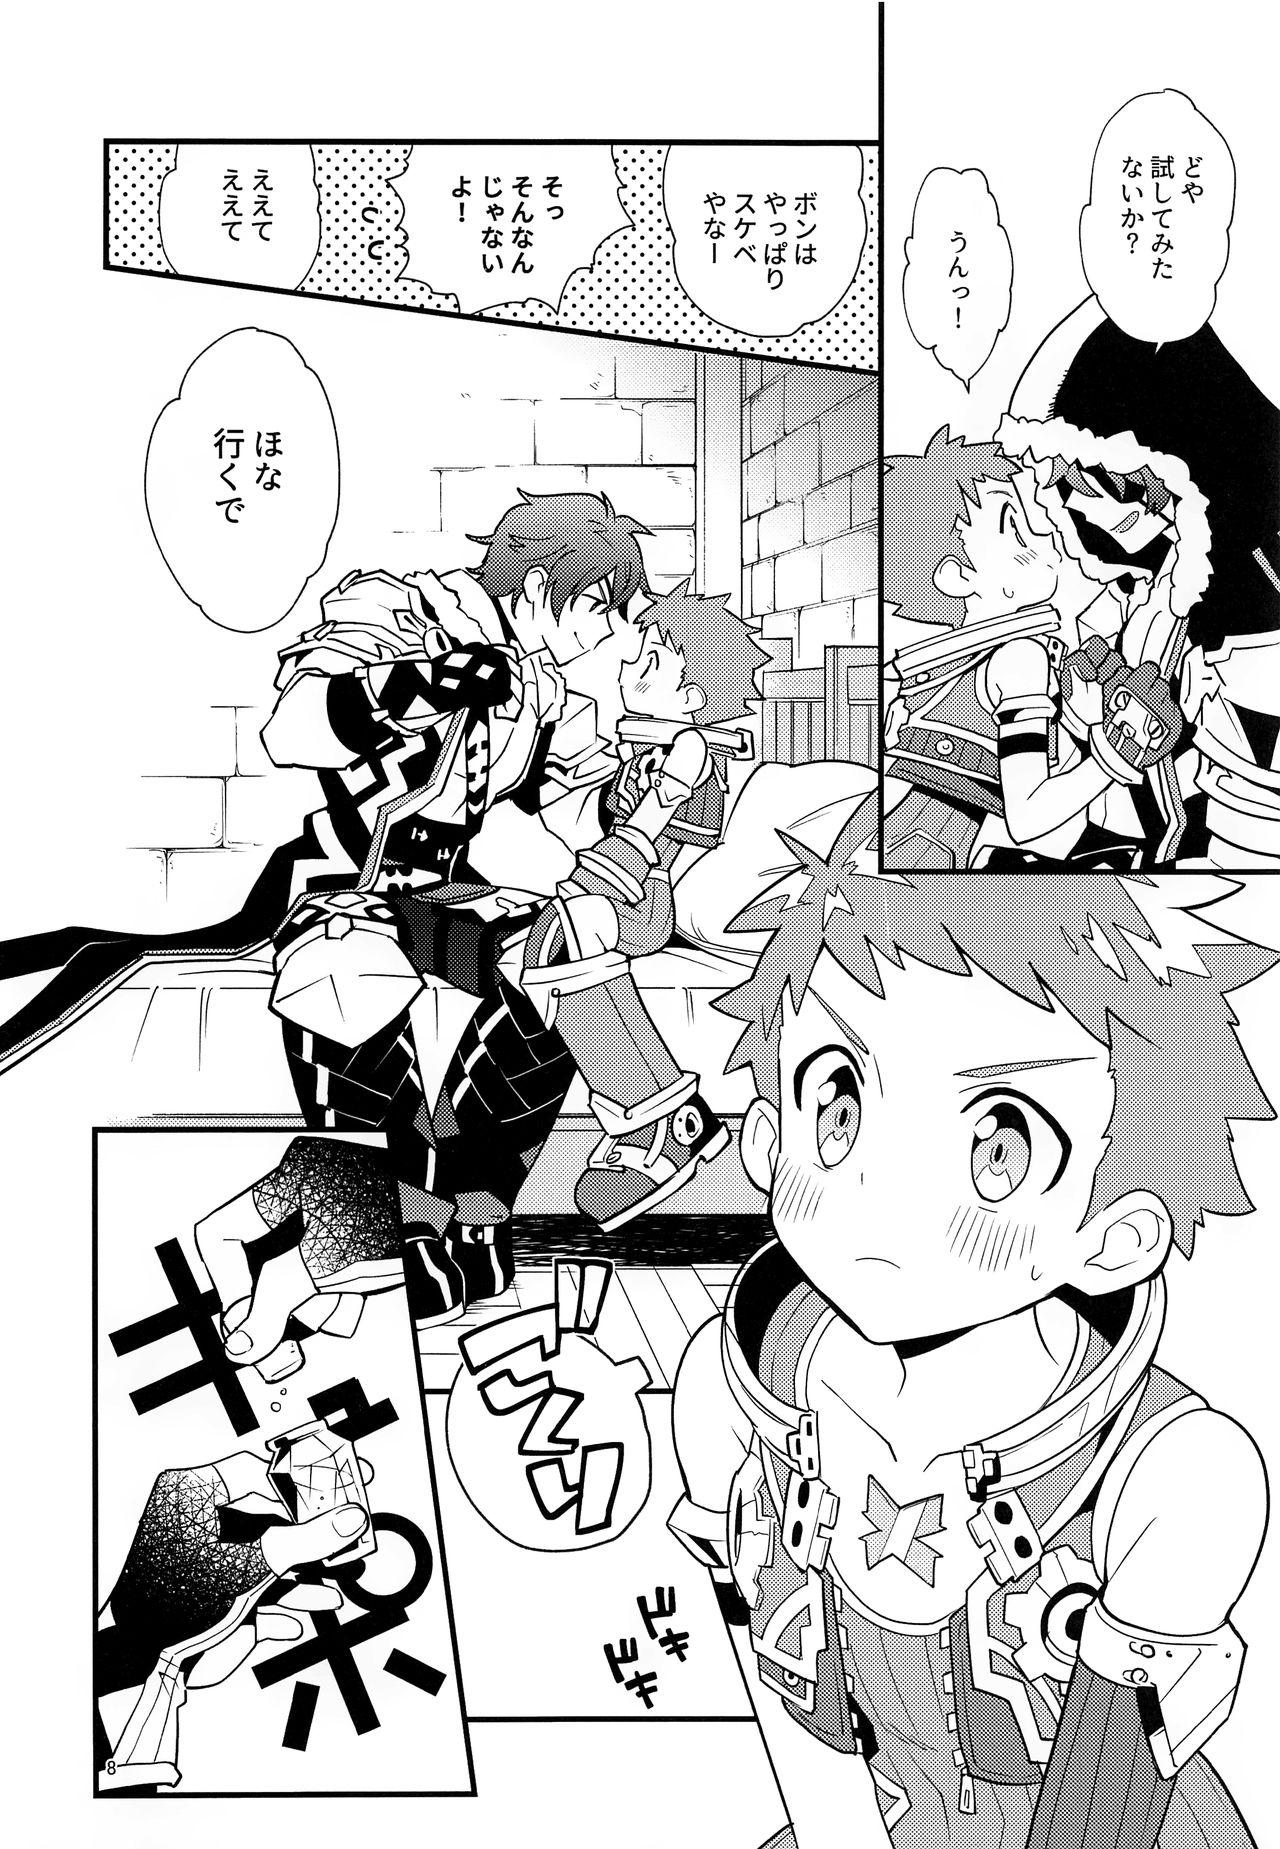 Boss TROP DUEX - Xenoblade chronicles 2 Anal - Page 7